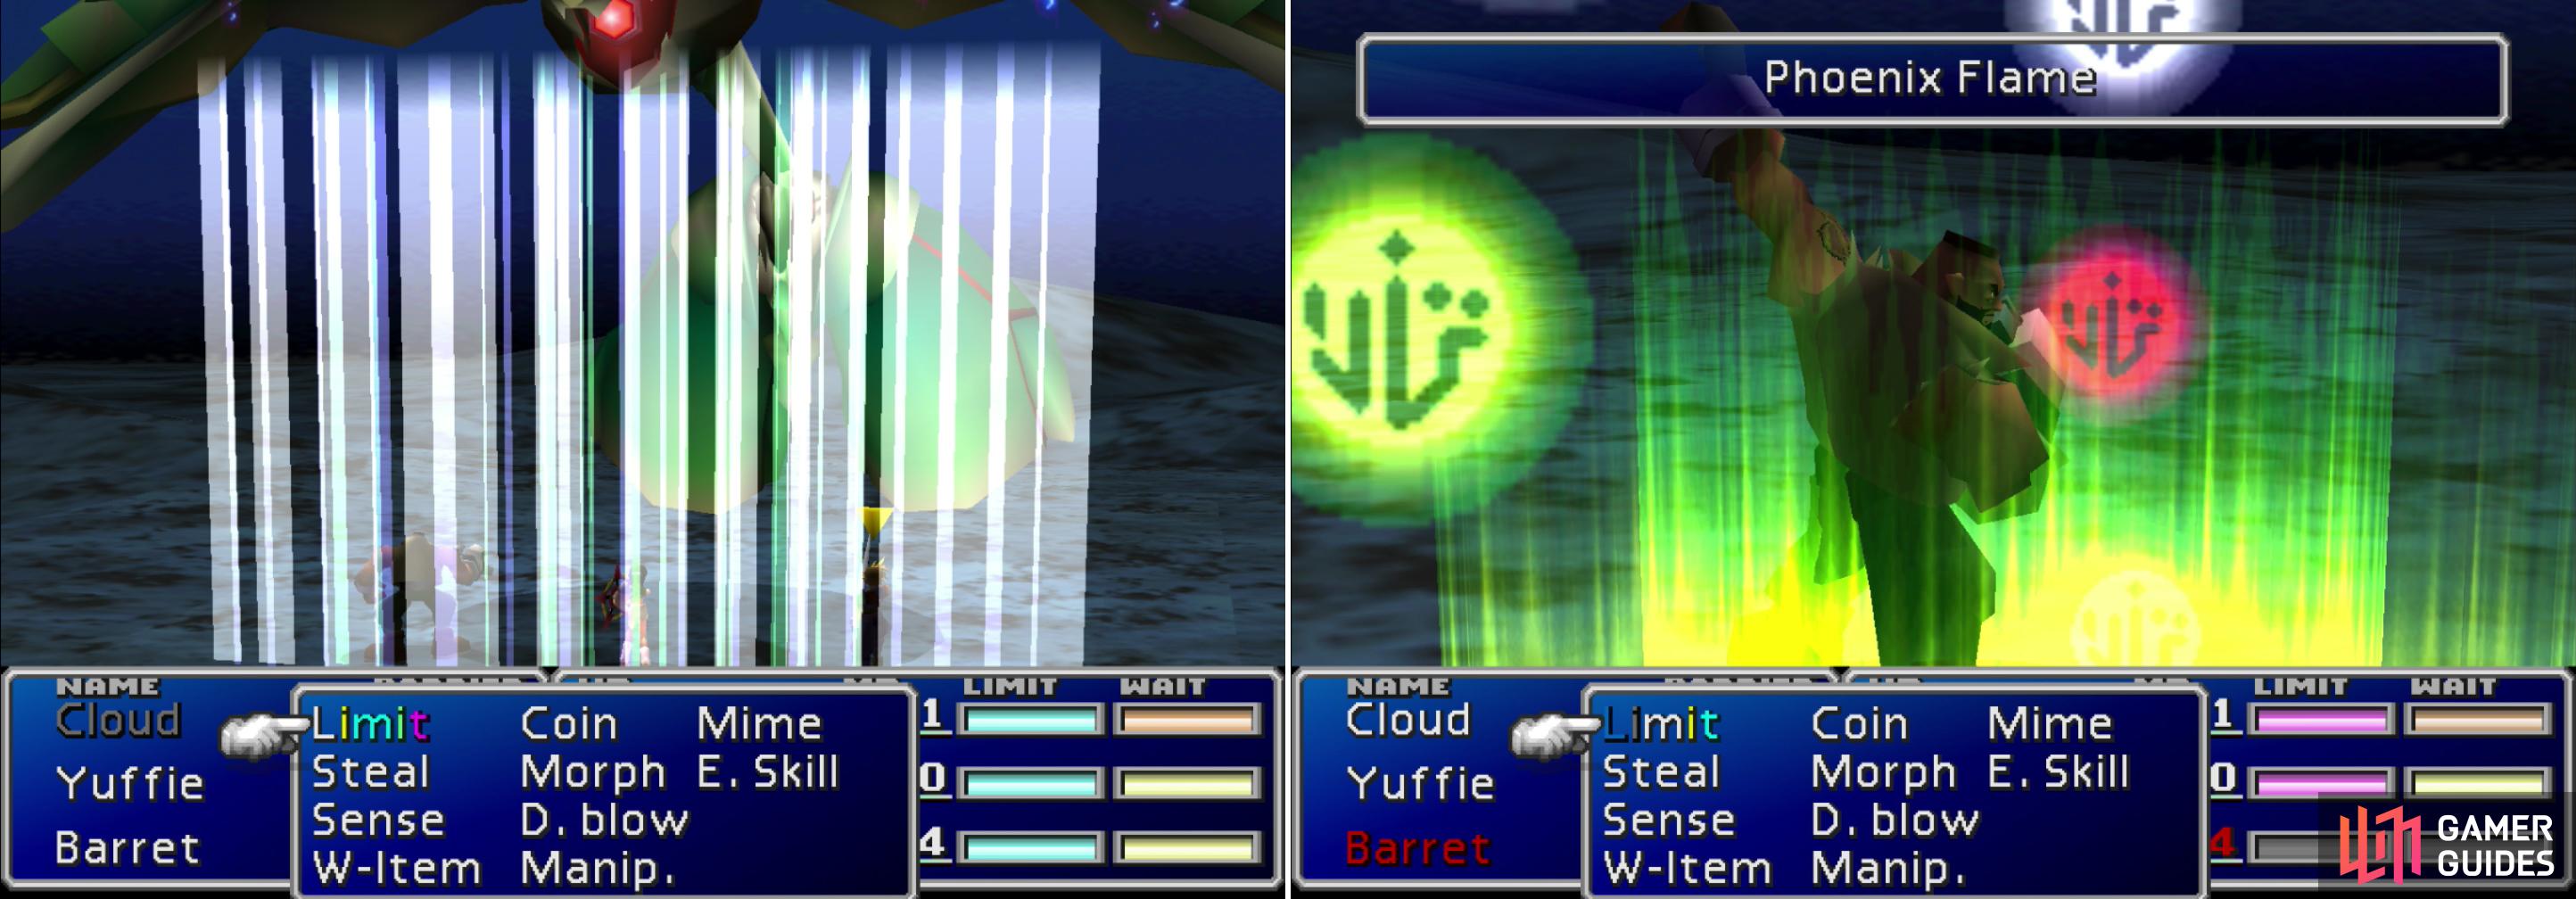 Emerald Weapon’s Aire Tam Storm is easily its most dangerous attack, dealing 1111 damage per piece of Materia a character has equipped (left). Having Phoenix + Final Attack Materia equipped will revive the party in case they get wiped out (right).